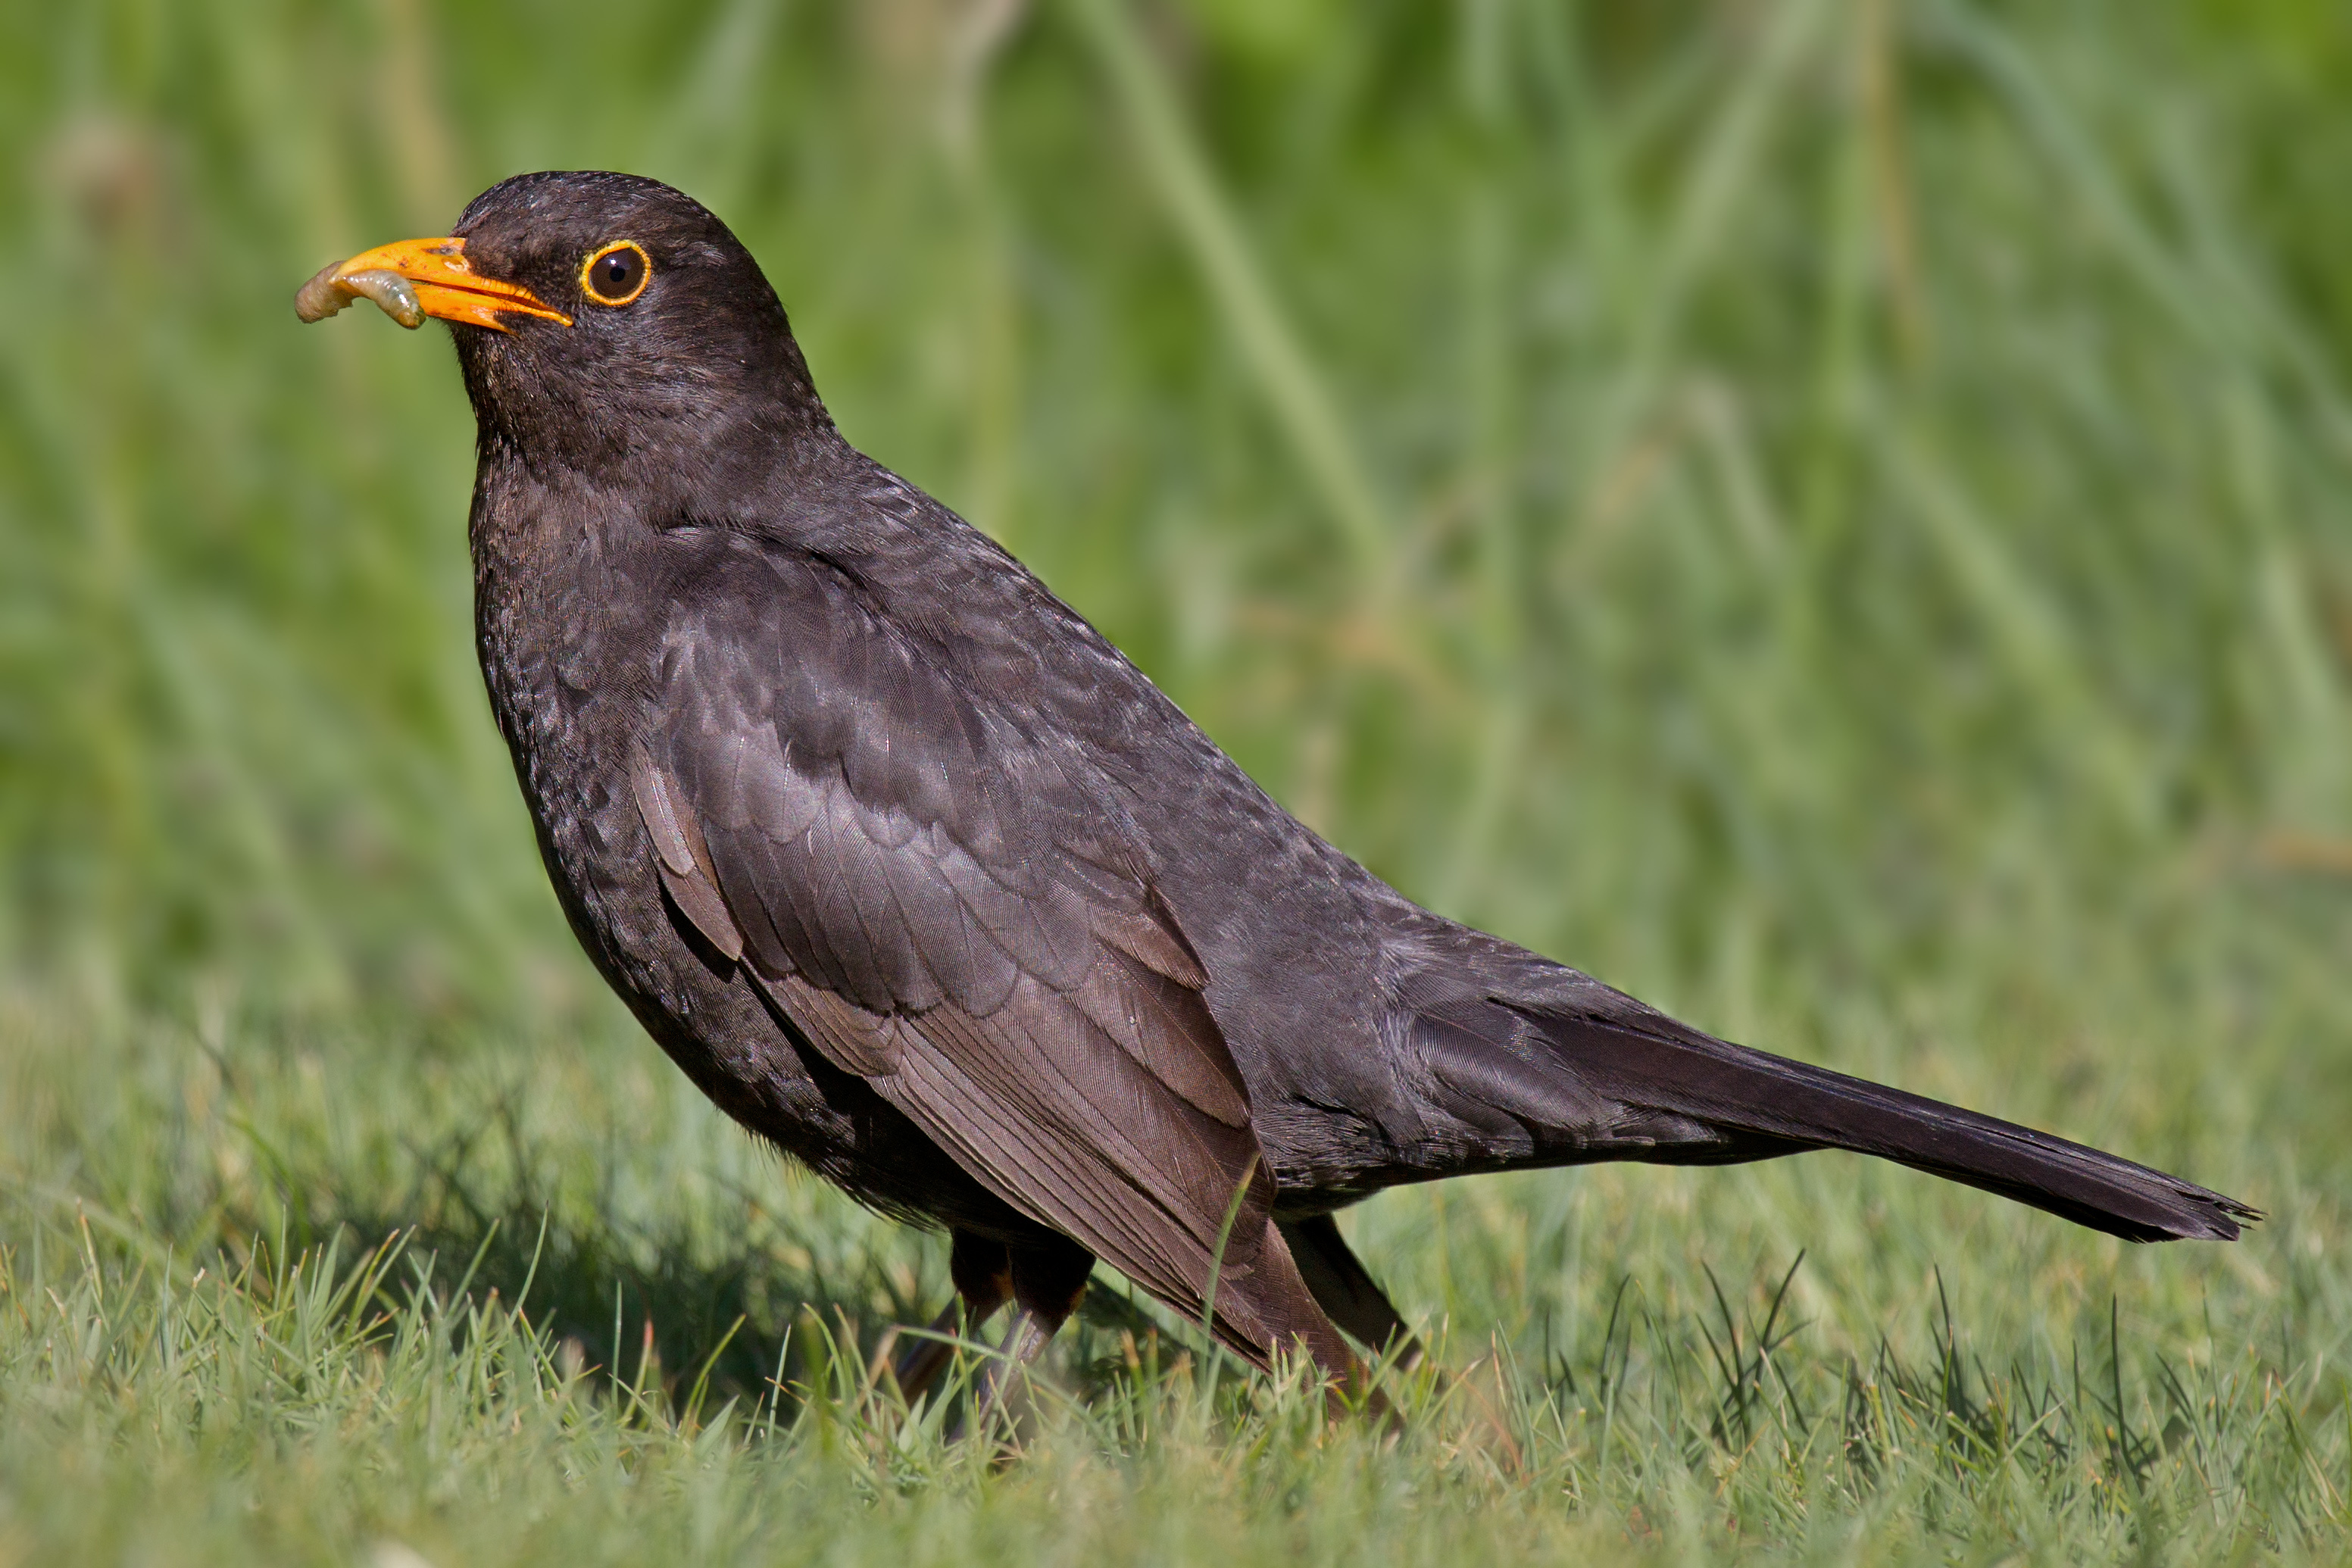 Common Blackbird, HQ wallpapers, High-quality pictures, 4K resolution, 3110x2070 HD Desktop